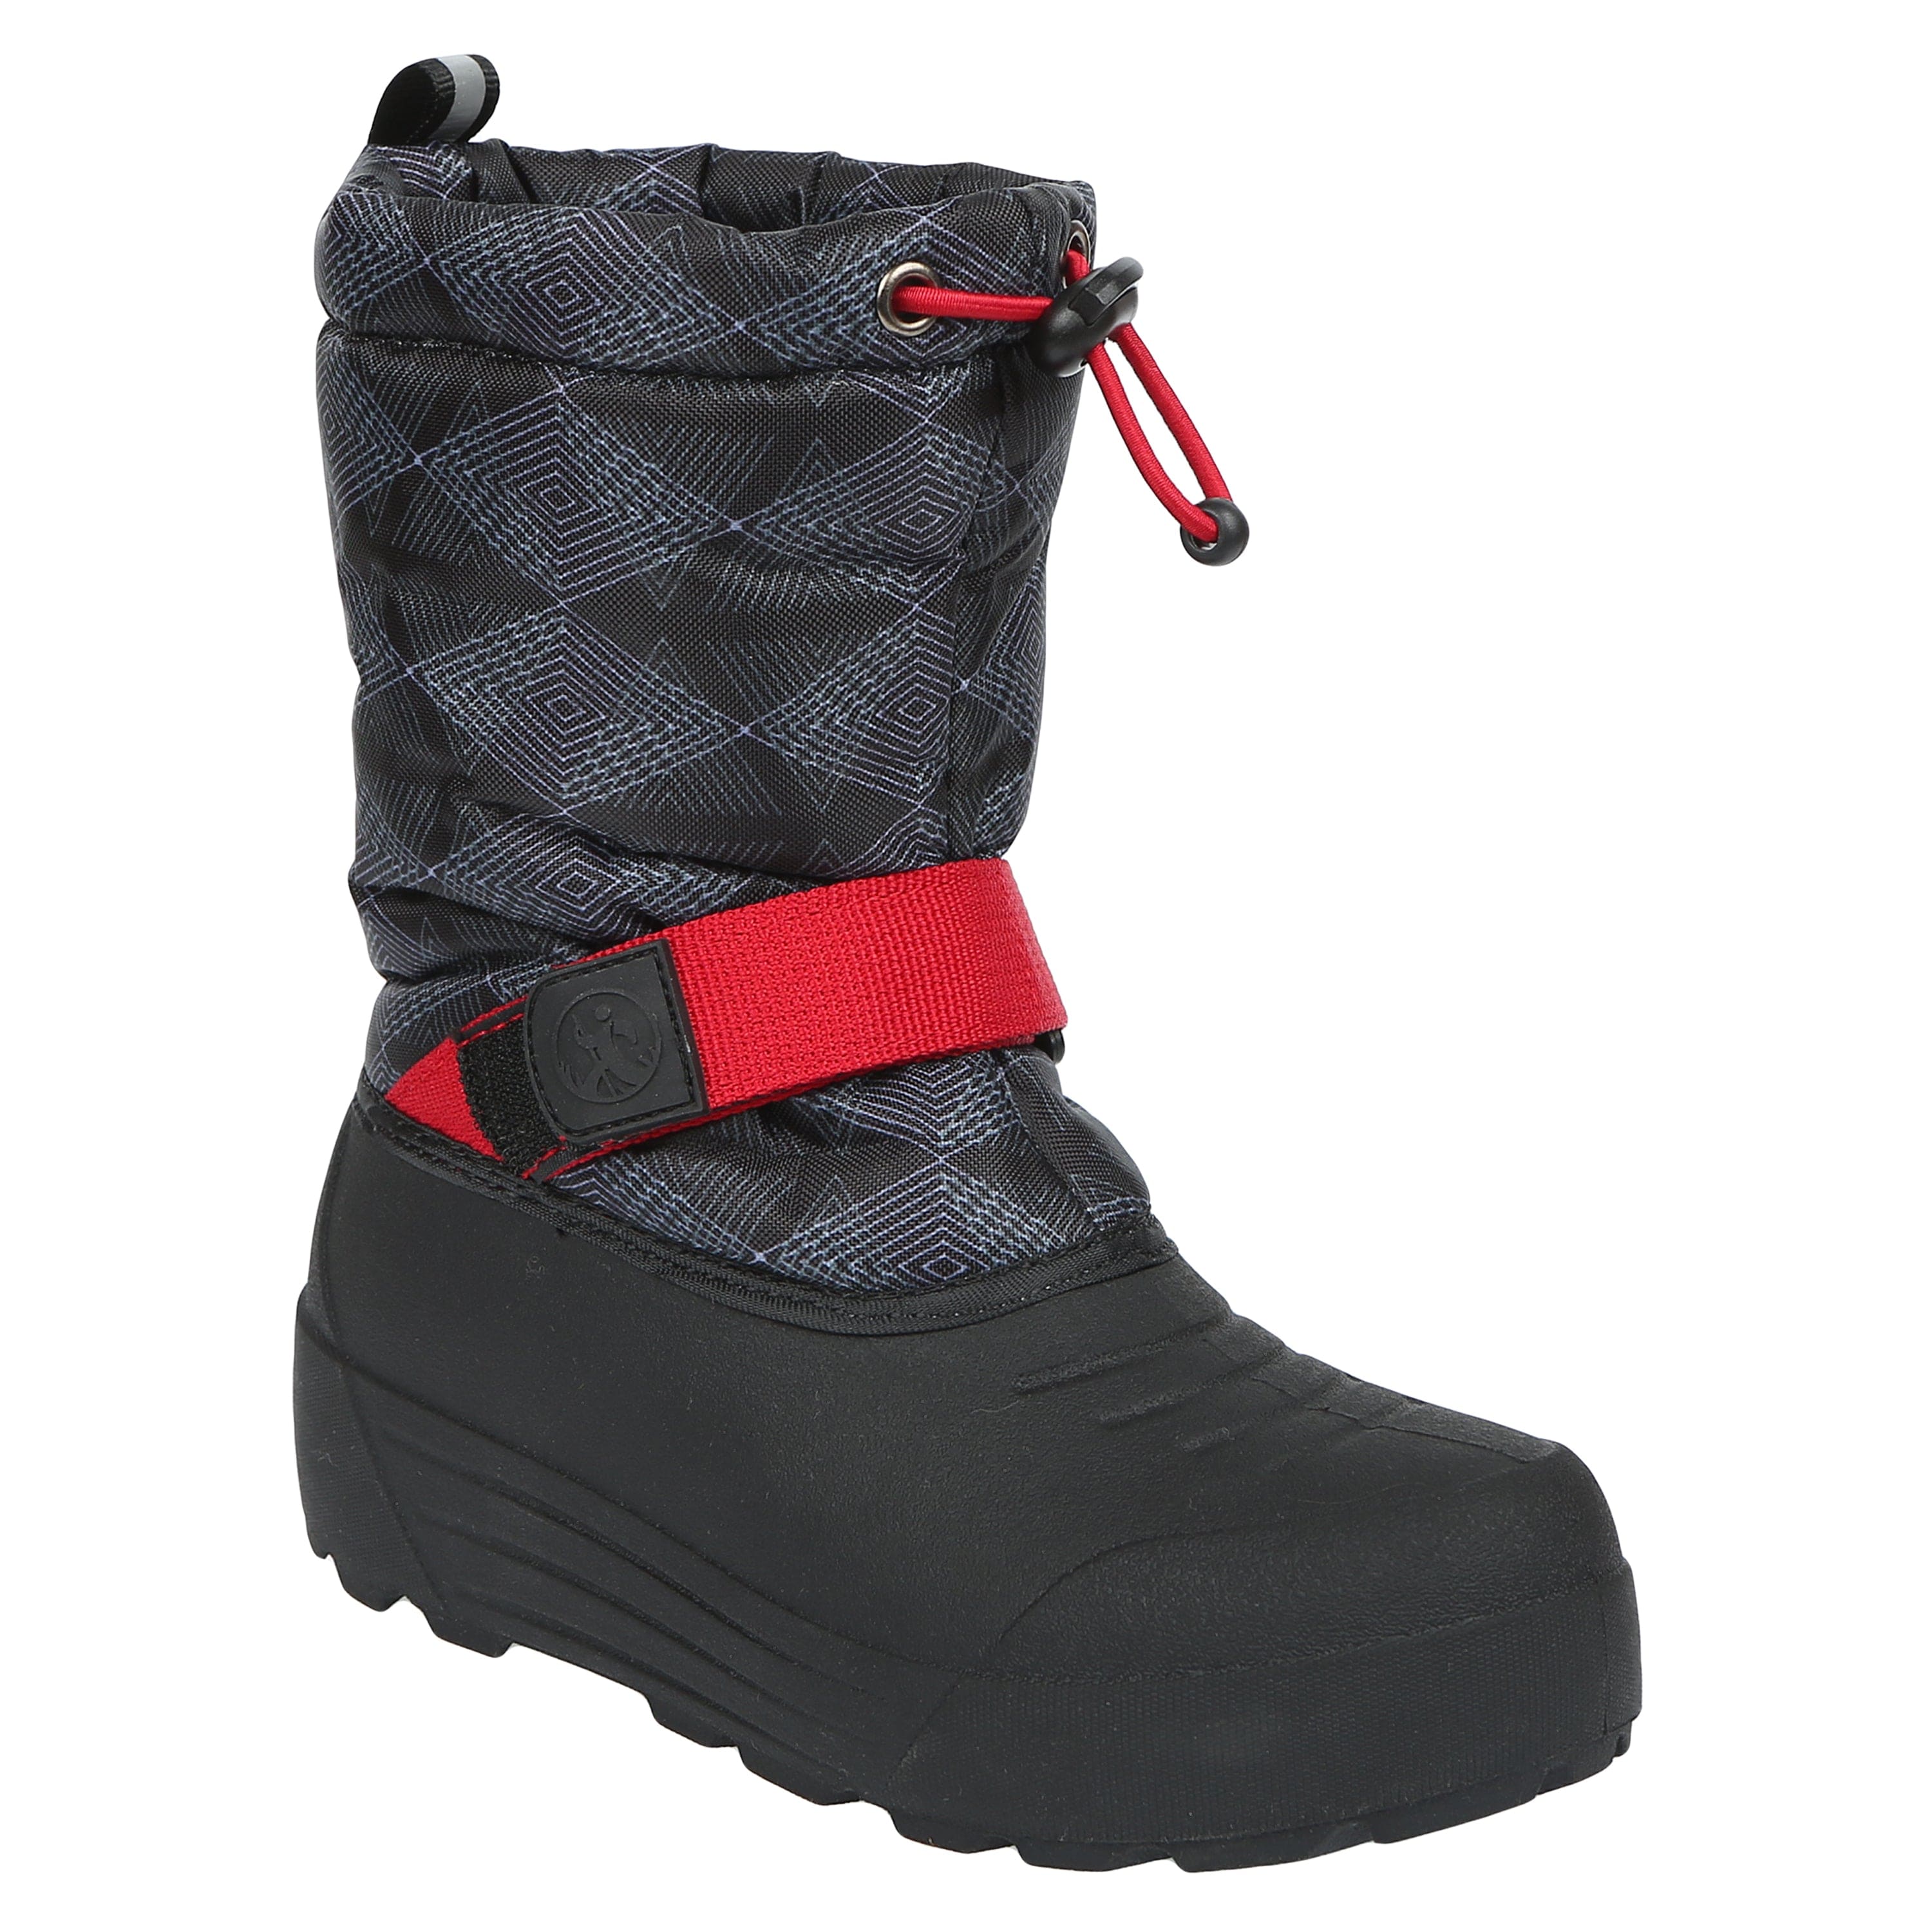 Toddler's Frosty Insulated Winter Snow Boot